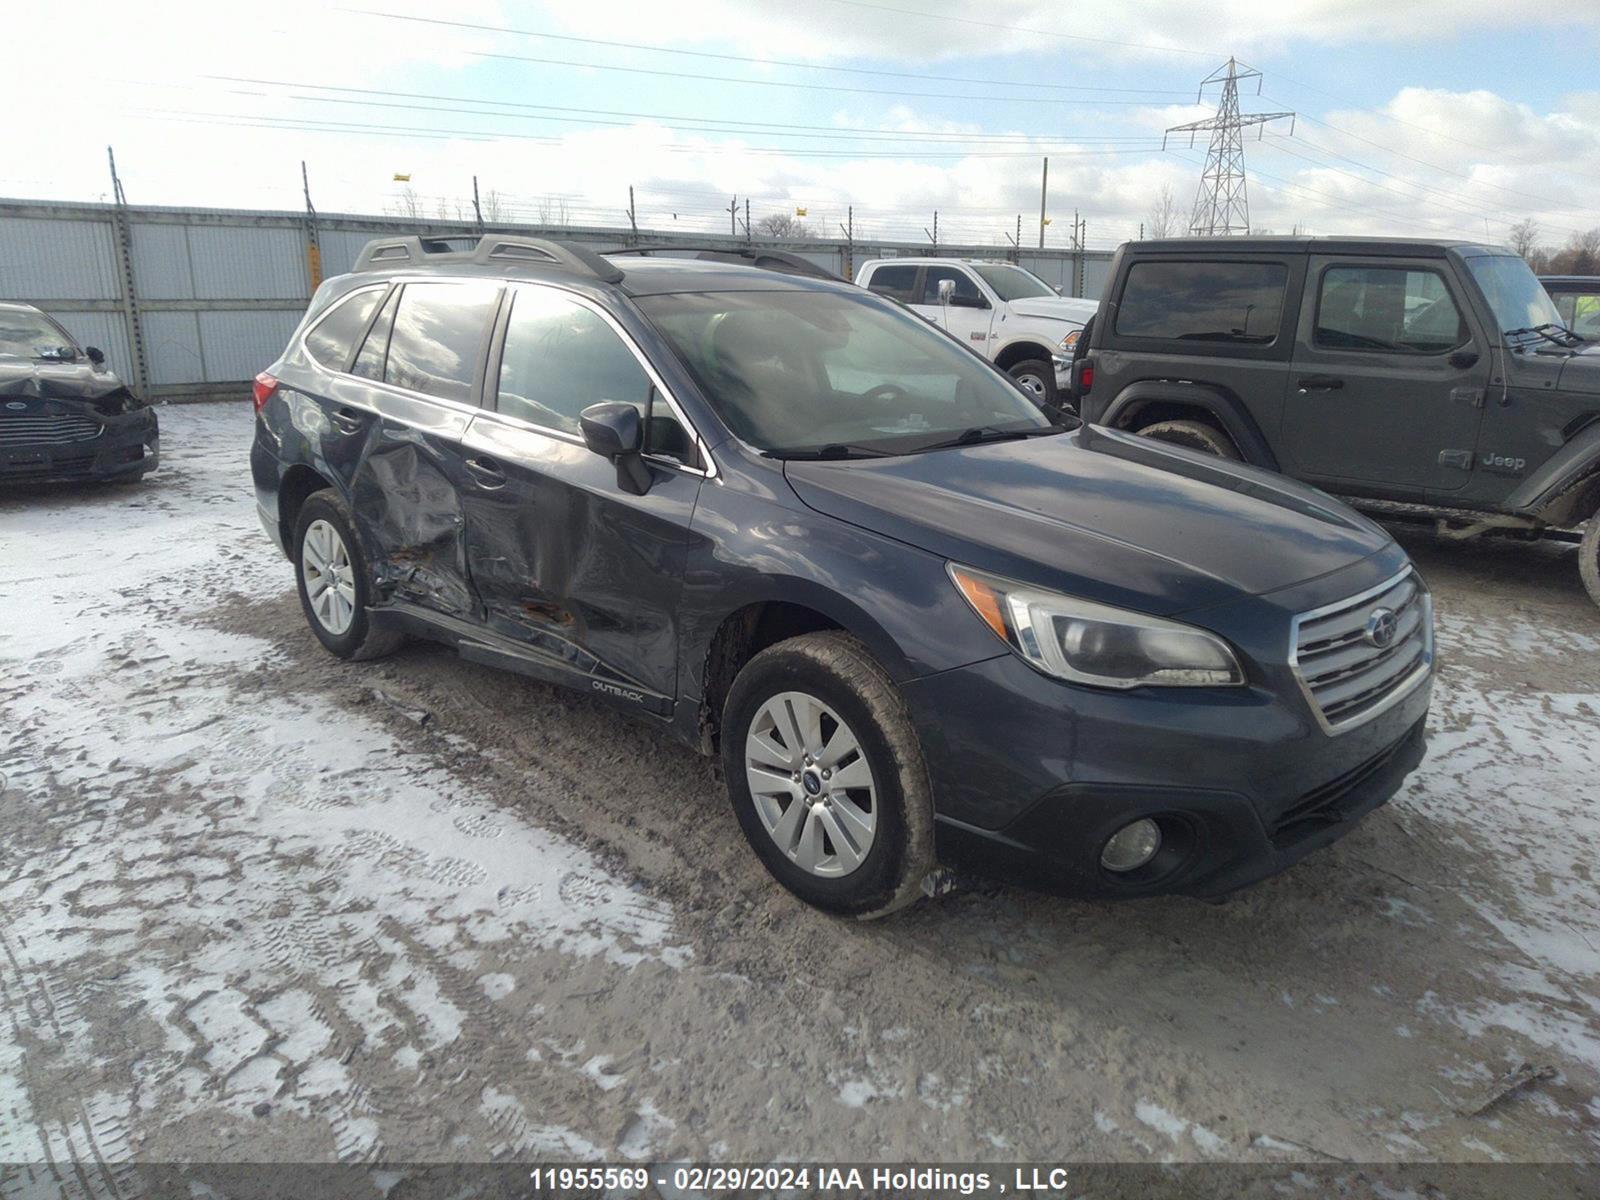 vin: 4S4BSCGCXH3287759 4S4BSCGCXH3287759 2017 subaru outback 2500 for Sale in n5w6b8, 1900 Gore Road , London, Ontario, Canada